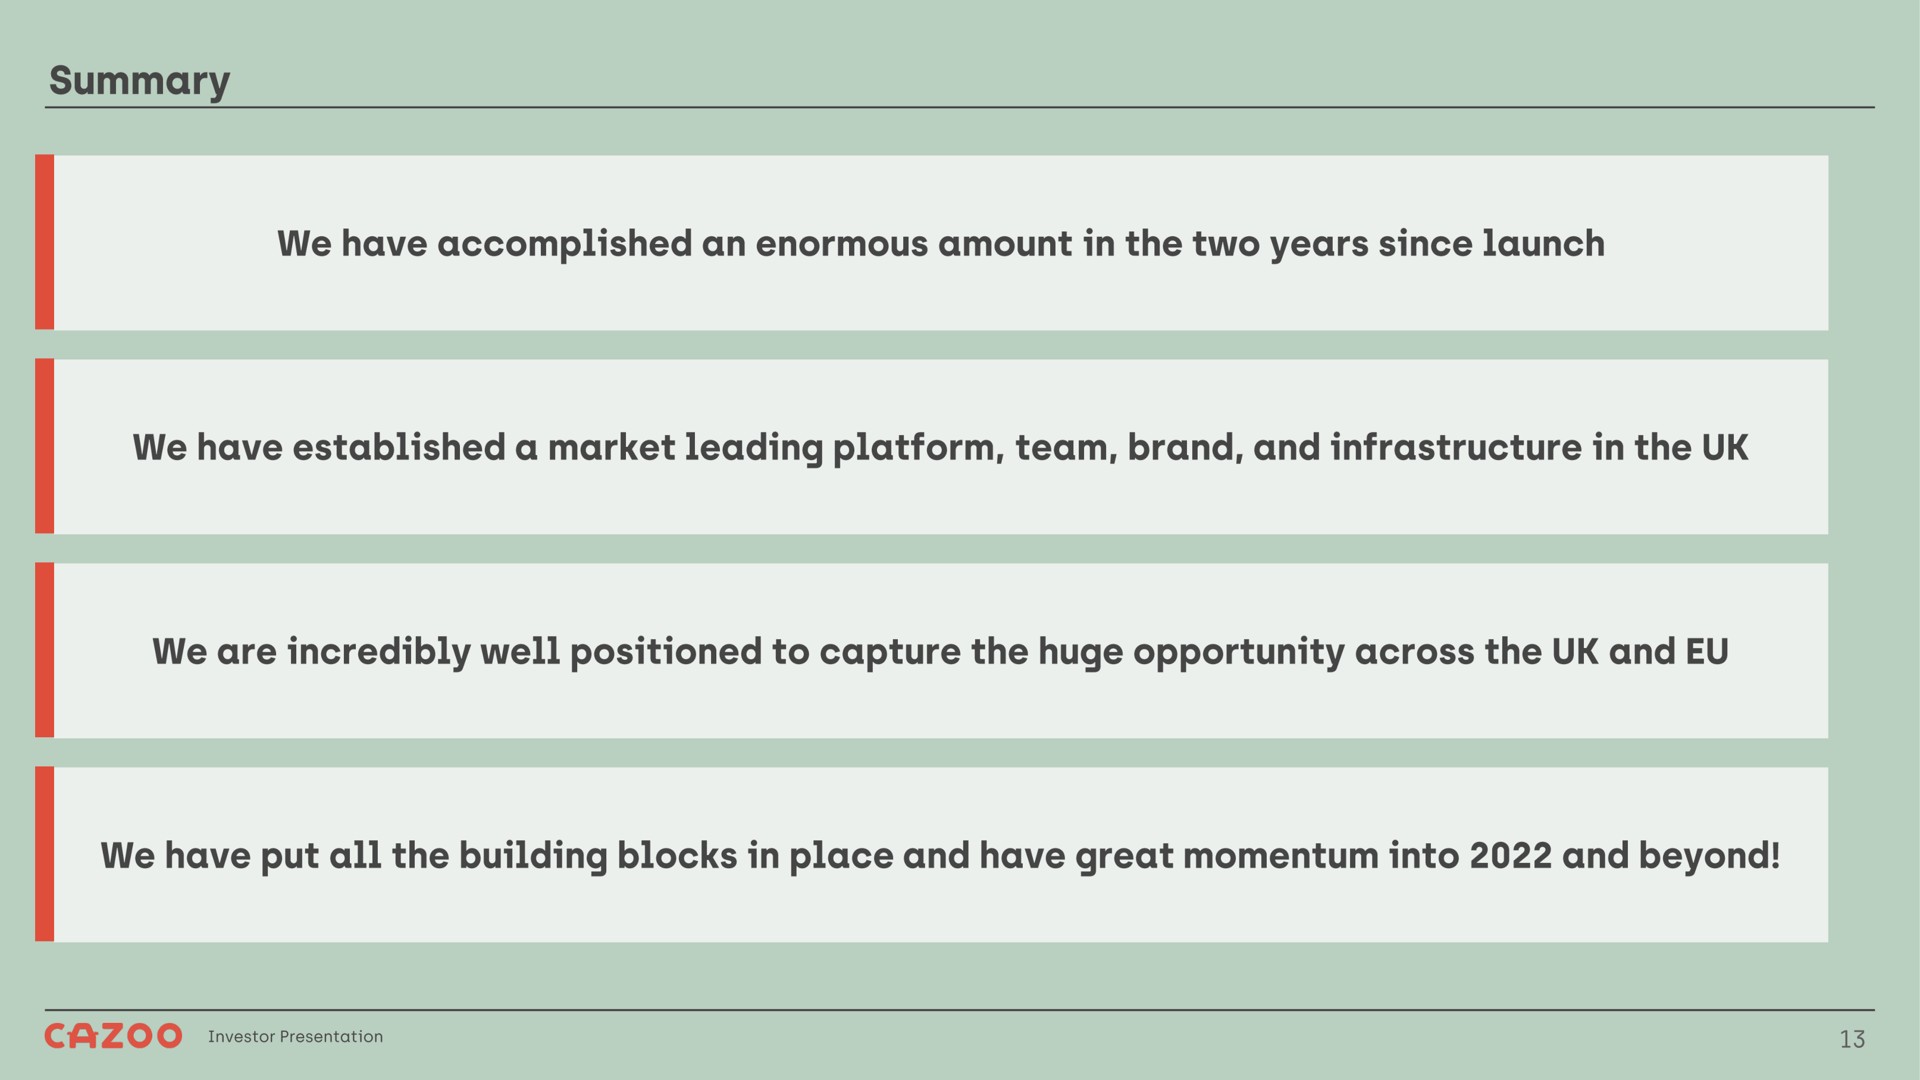 summary we have accomplished an enormous amount in the two years since launch we have established a market leading platform team brand and infrastructure in the we are incredibly well positioned to capture the huge opportunity across the and we have put all the building blocks in place and have great momentum into and beyond | Cazoo